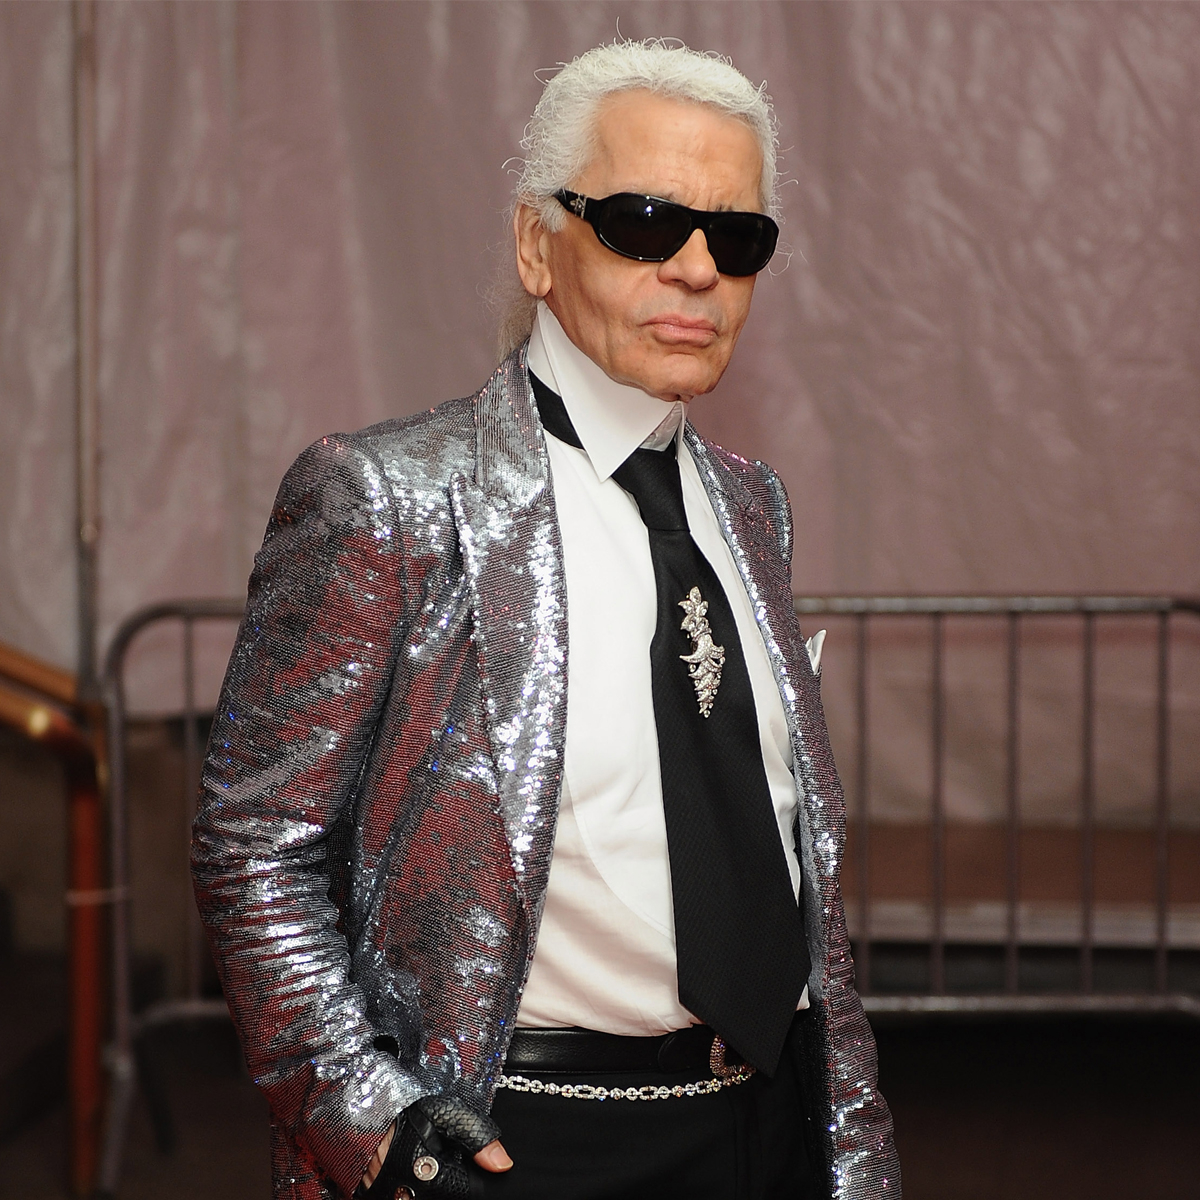 Met Gala theme for next year will celebrate the late fashion icon Karl  Lagerfeld